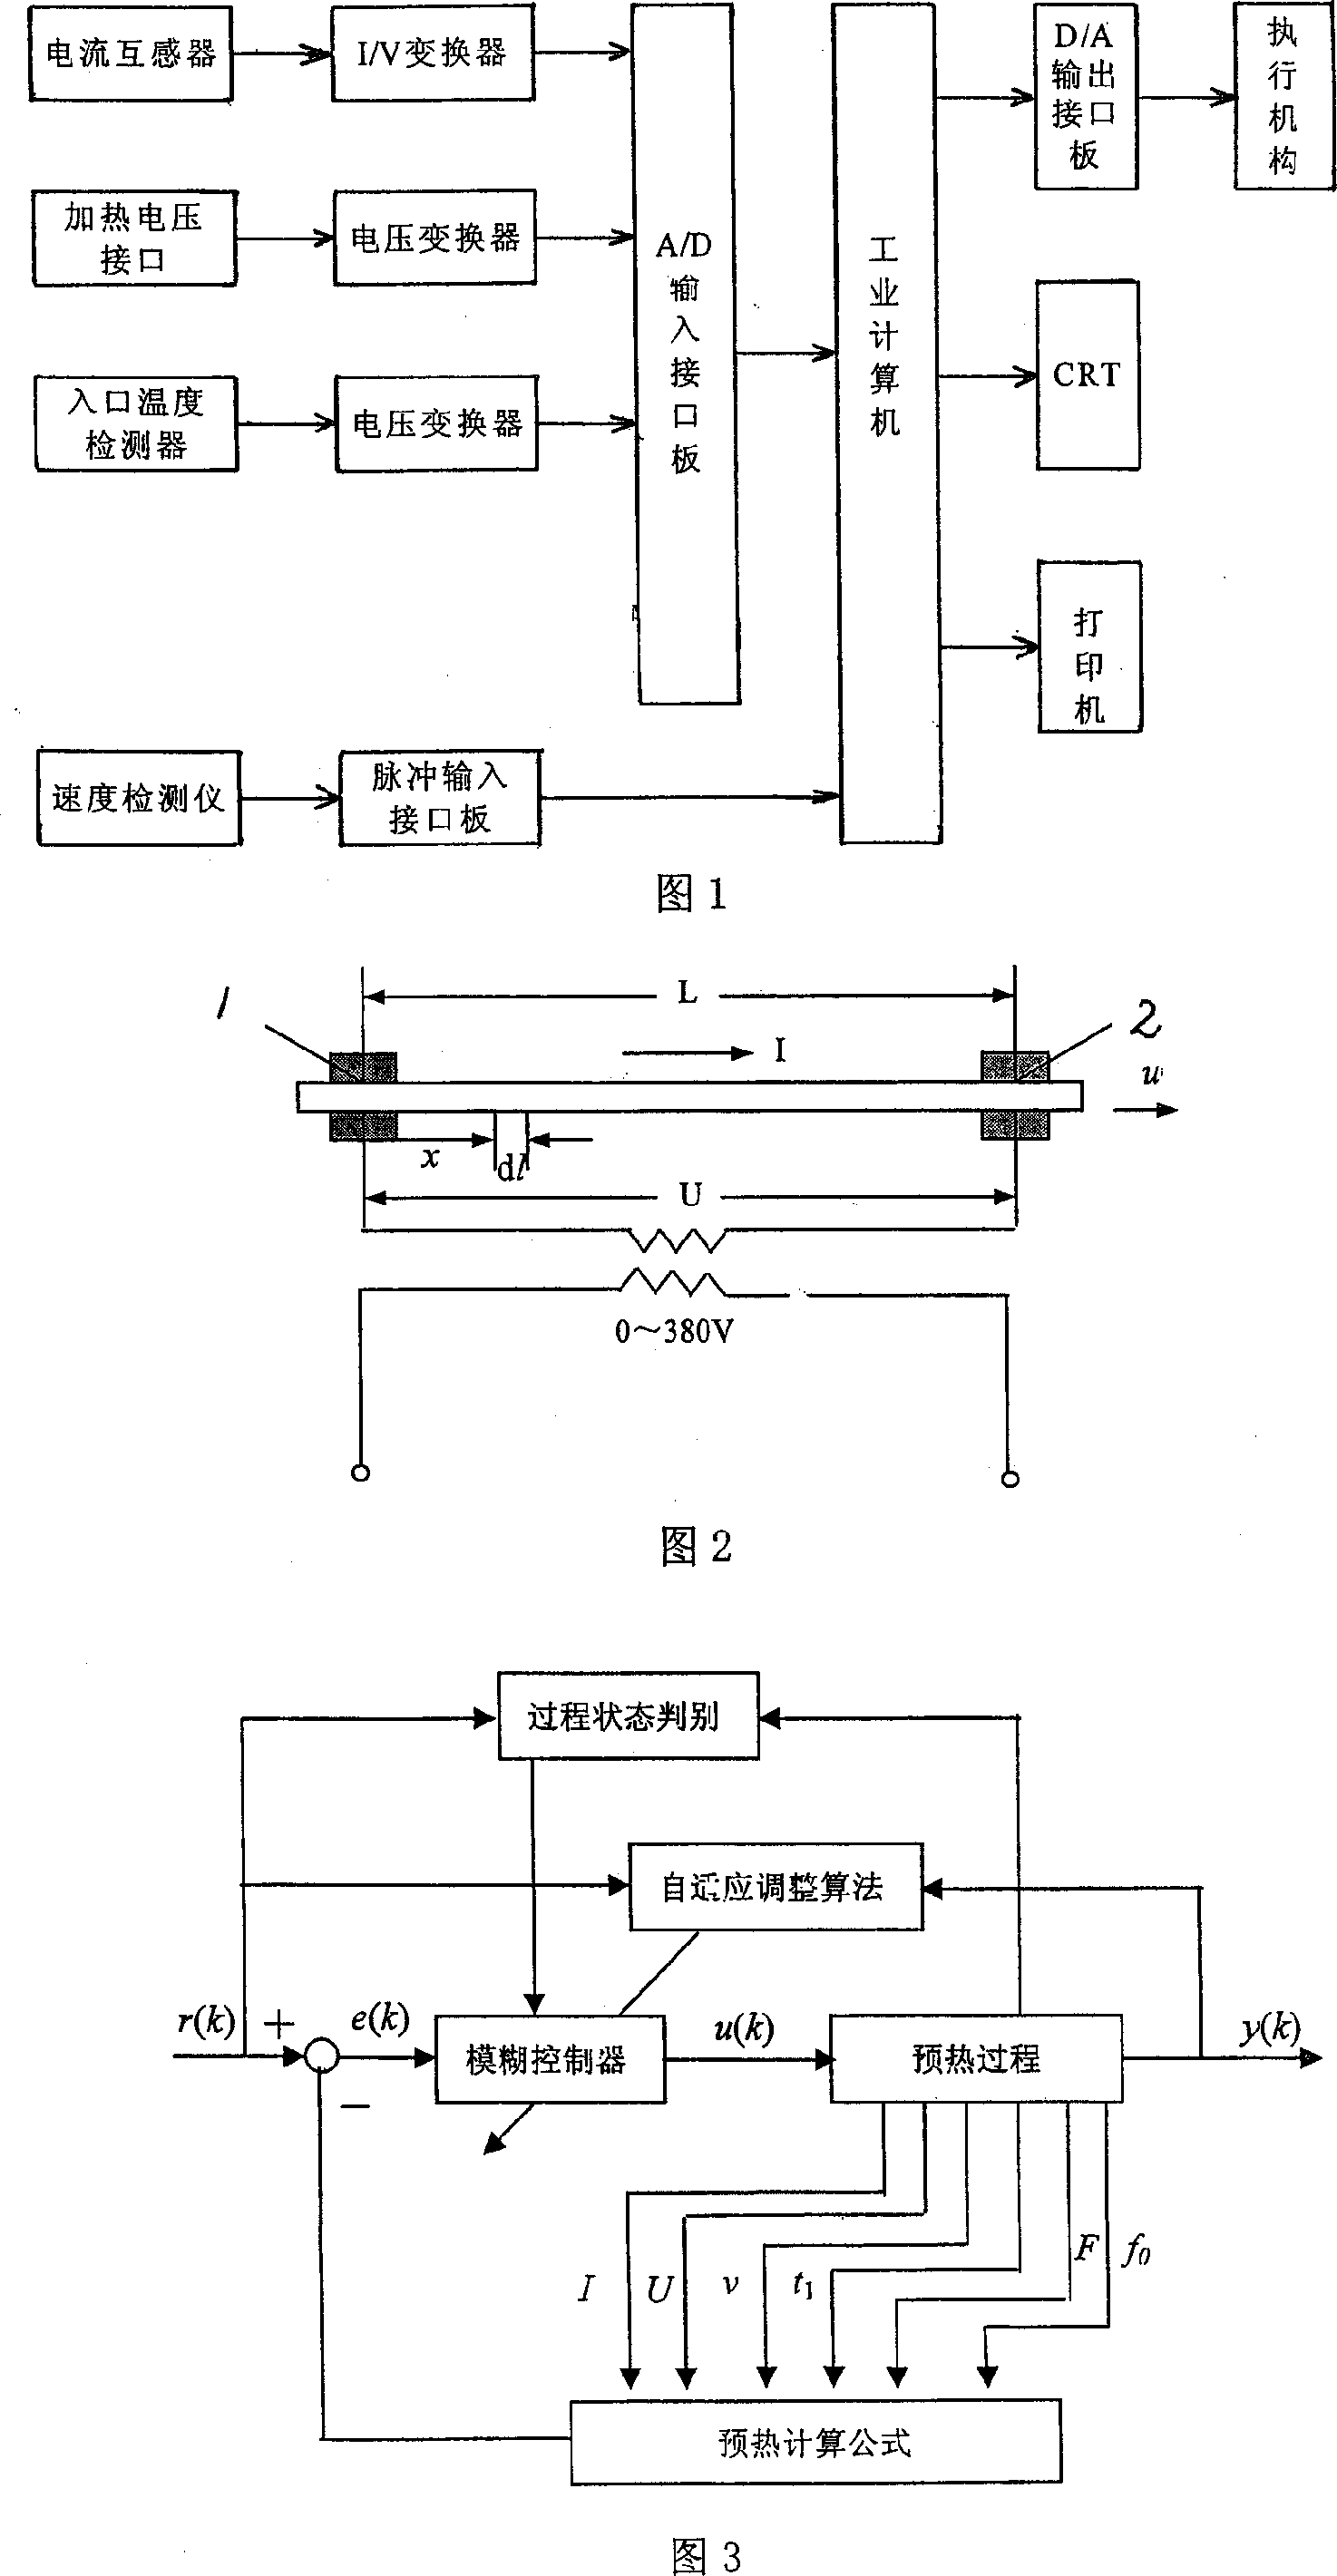 System for controlling procedure for warming - up wrapped welded tube with zinc coated, and plastic painted double layer, and control method